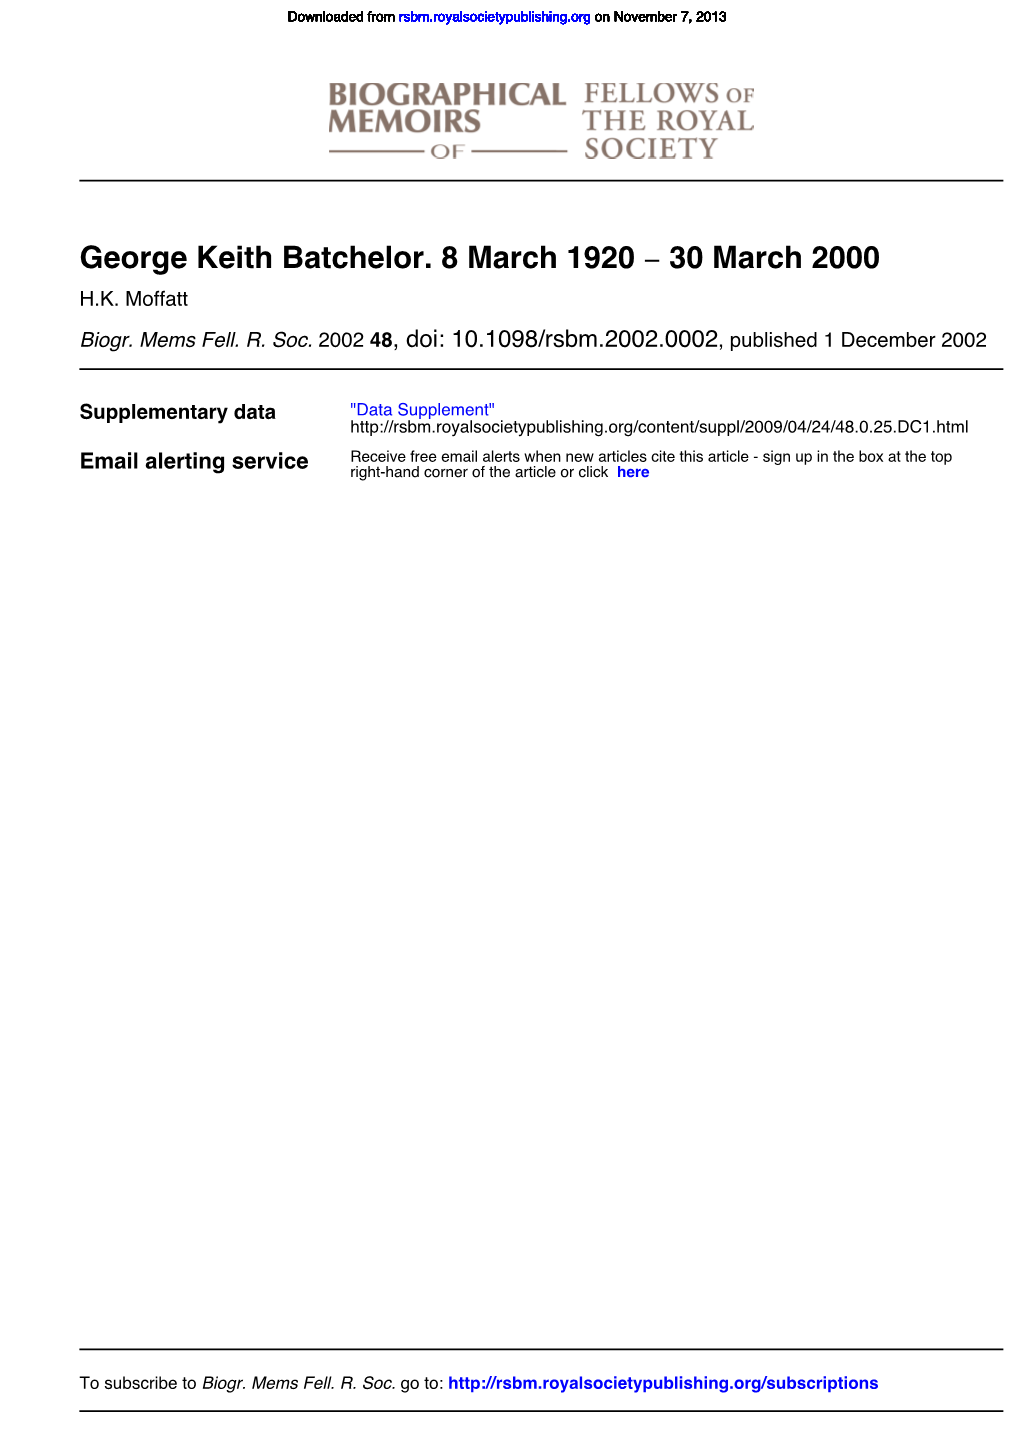 George Keith Batchelor. 8 March 1920 − 30 March 2000